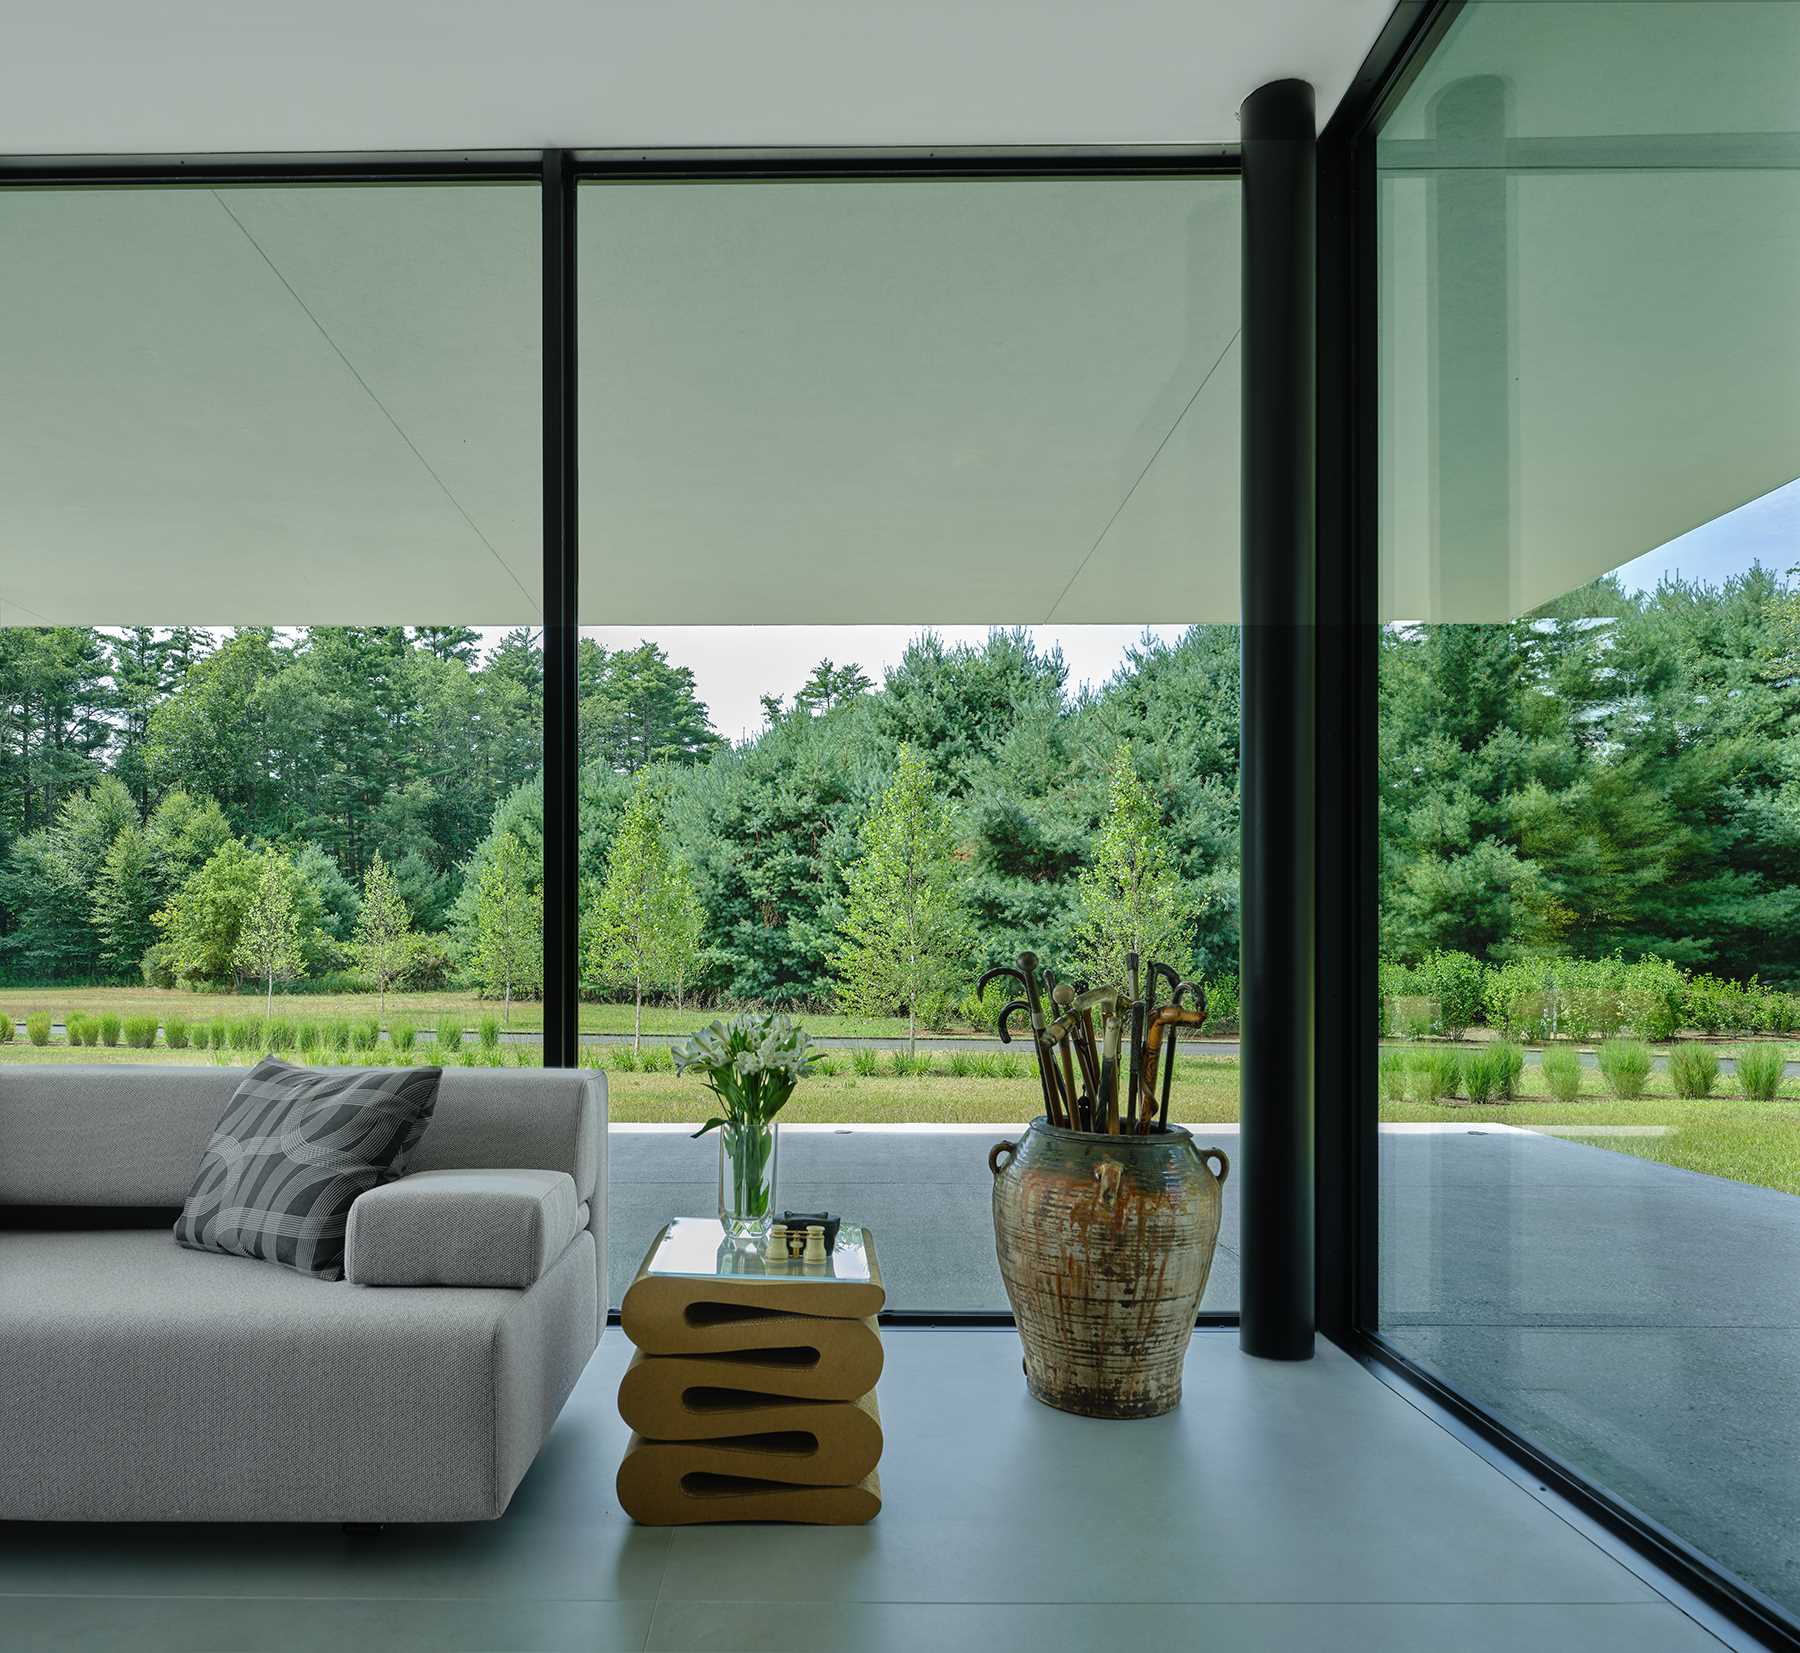 Floor-to-ceiling windows perfectly frame the tree views.